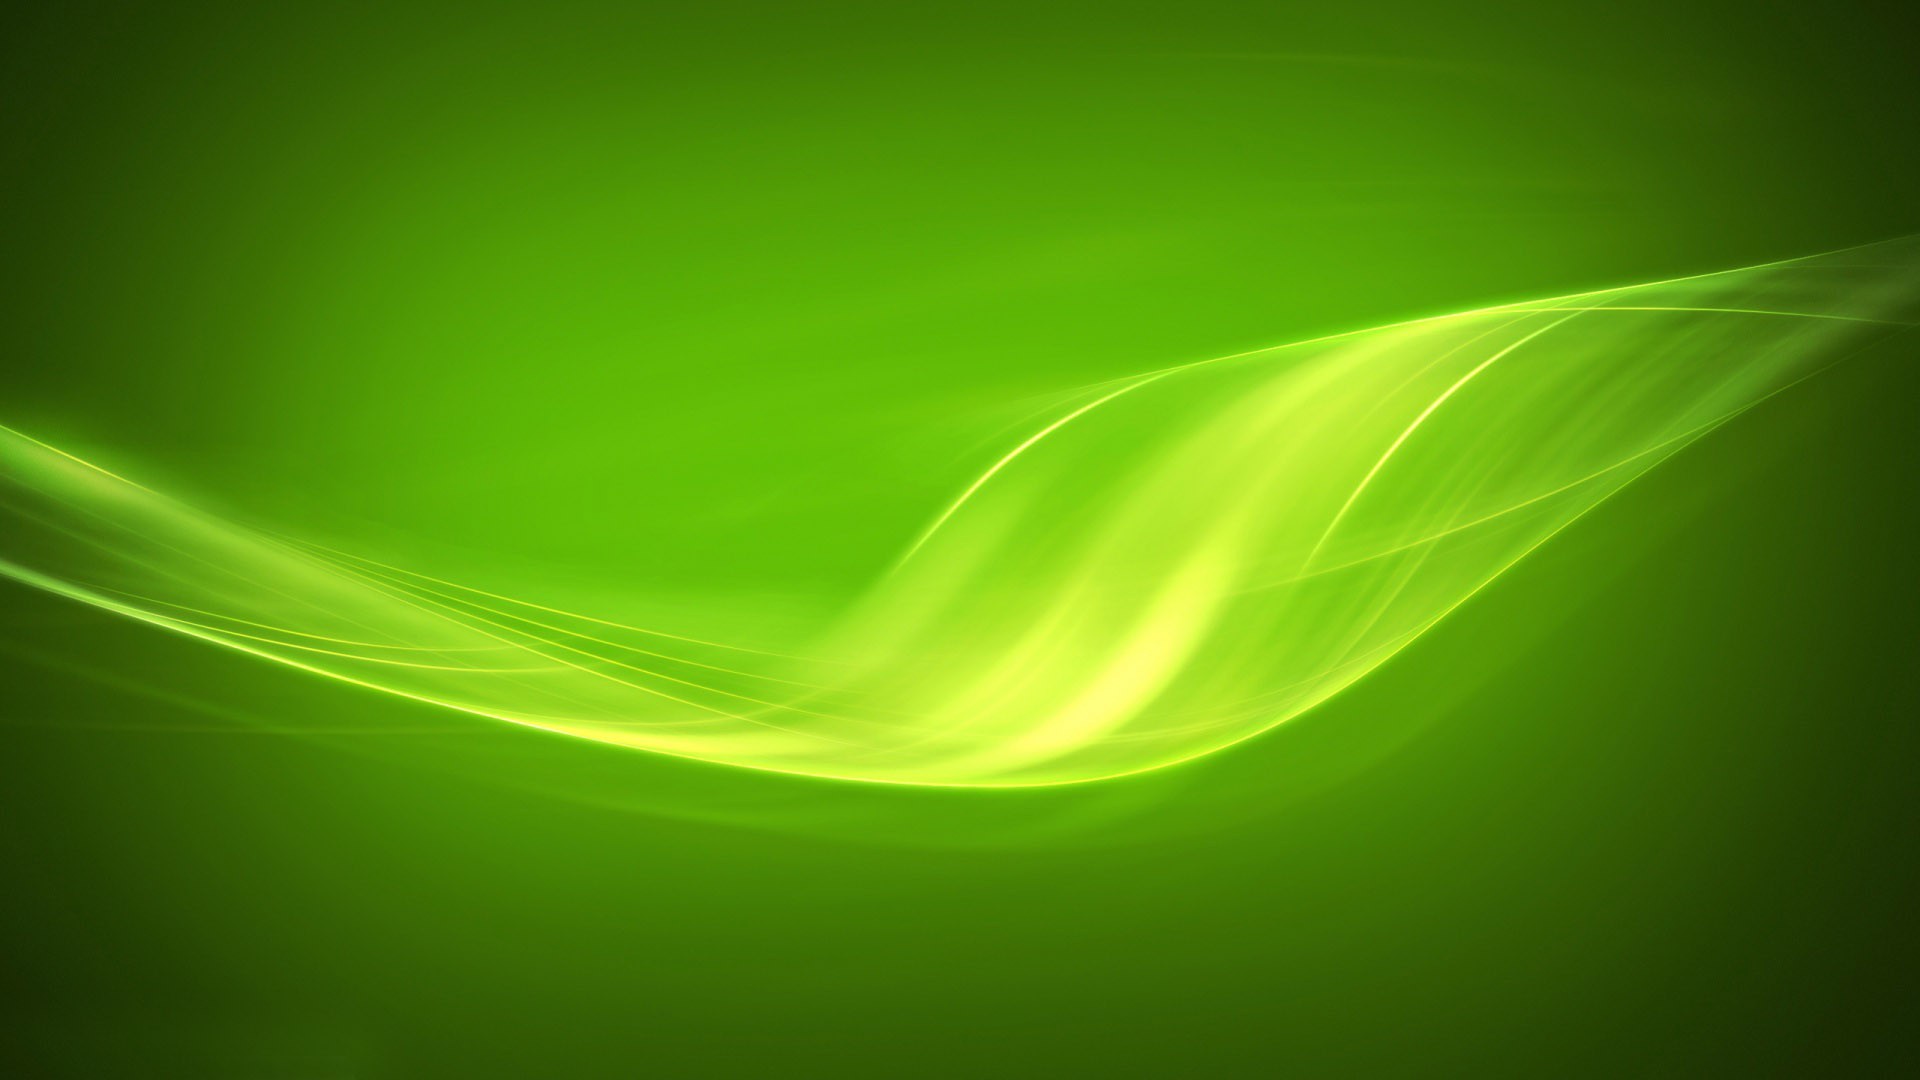 Green Waves wallpapers HD free   367818